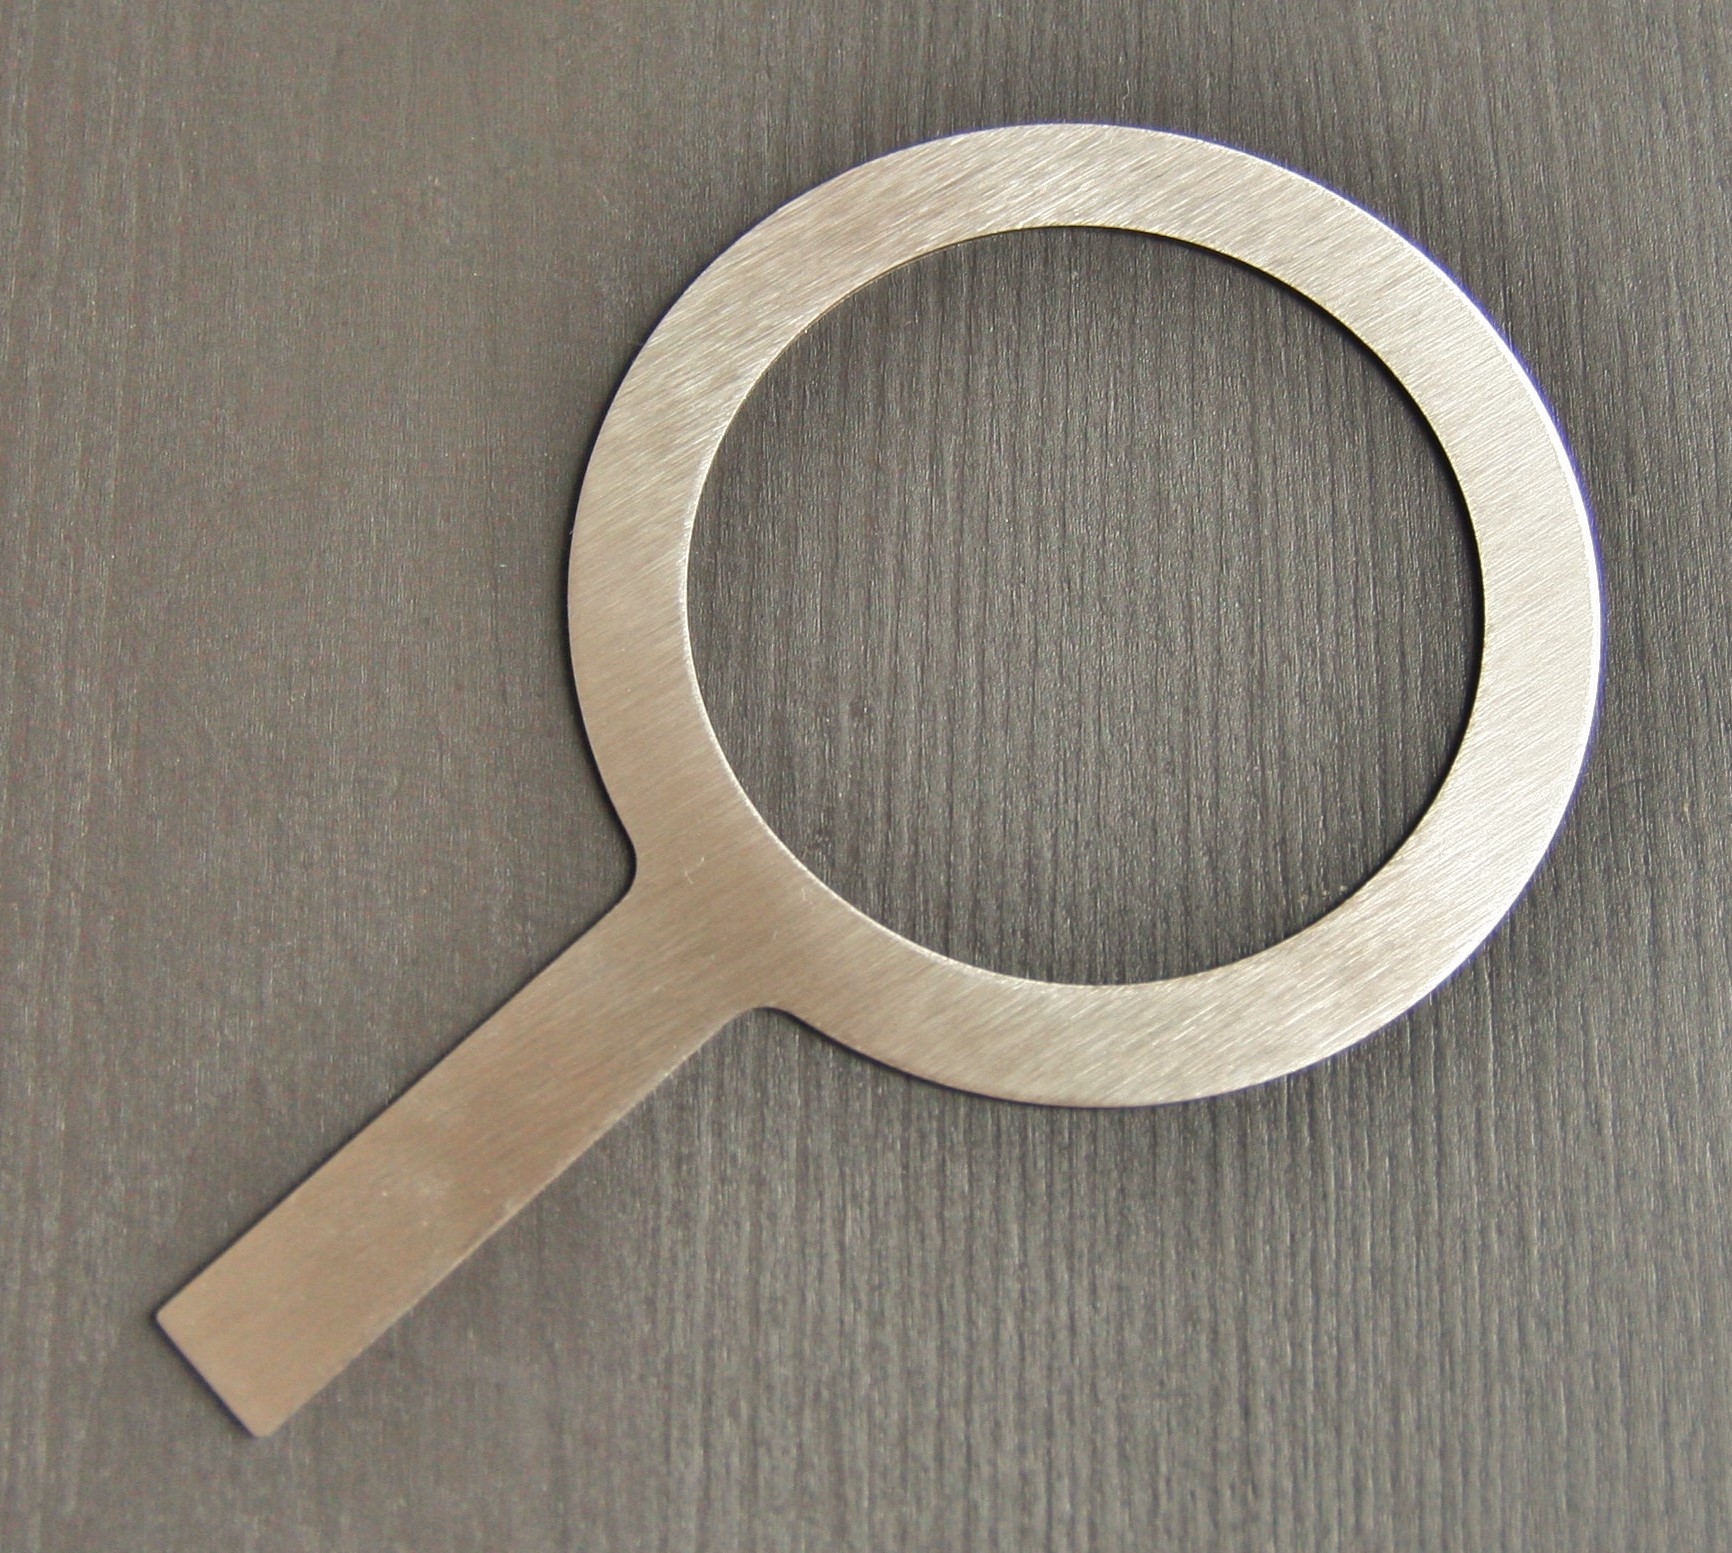 Calibre-stainless-steel-baking-ring-with-handle-1-1.jpg